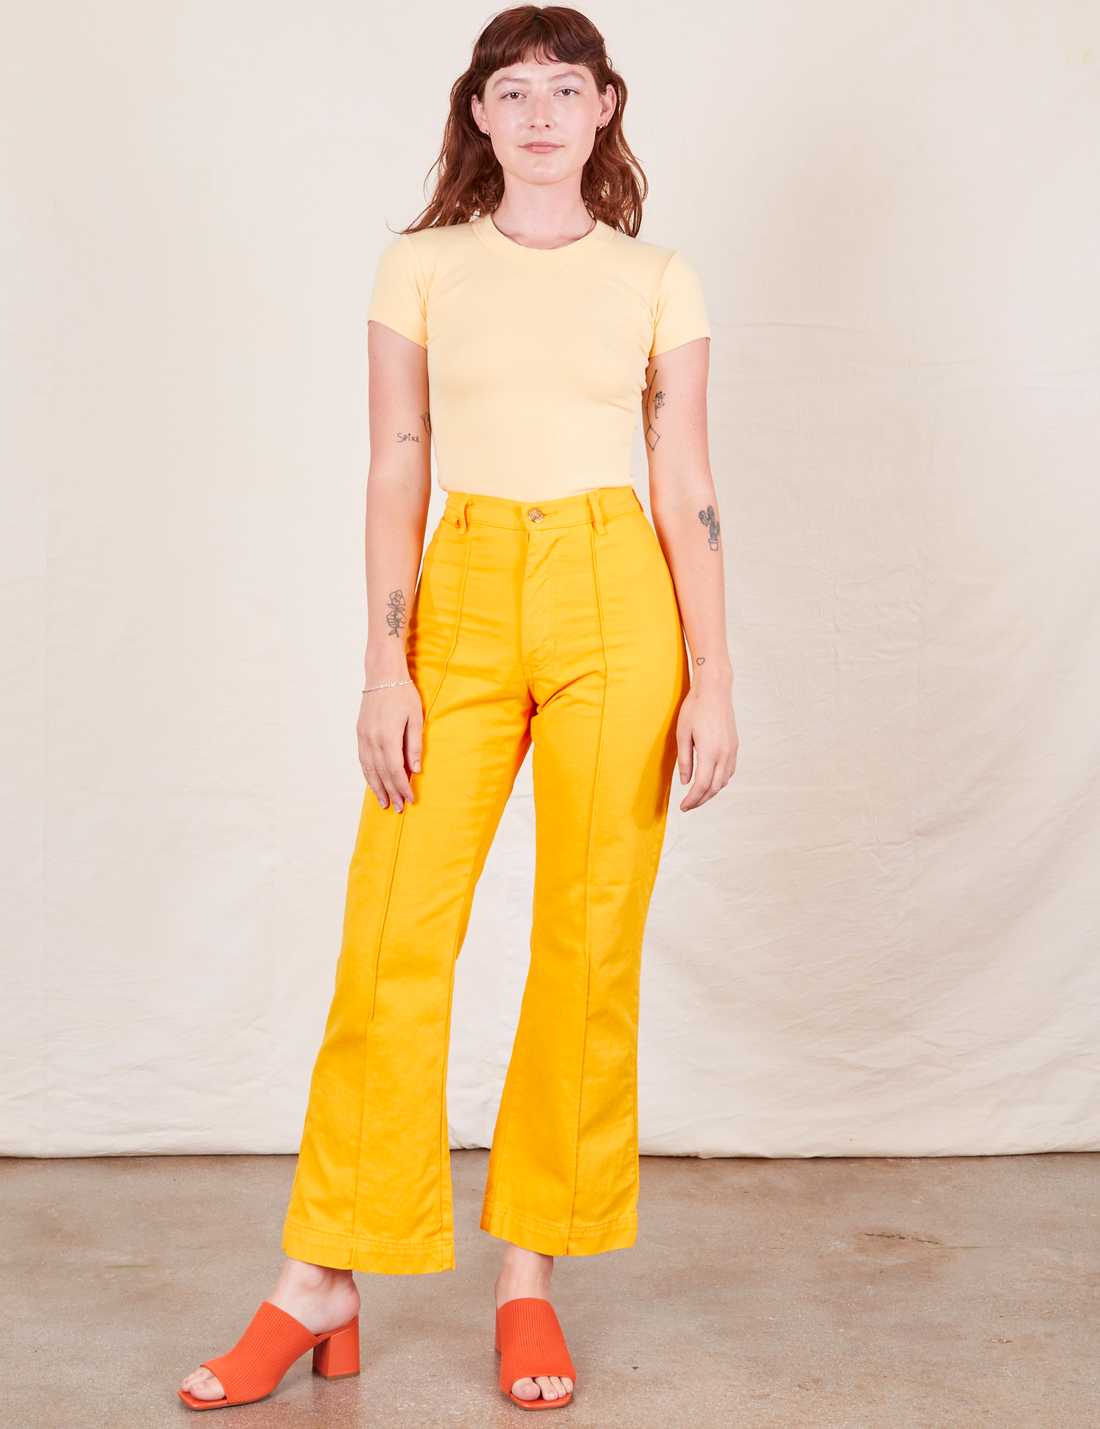 Western Pants in Sunshine Yellow on Alex wearing butter yellow Baby Tee